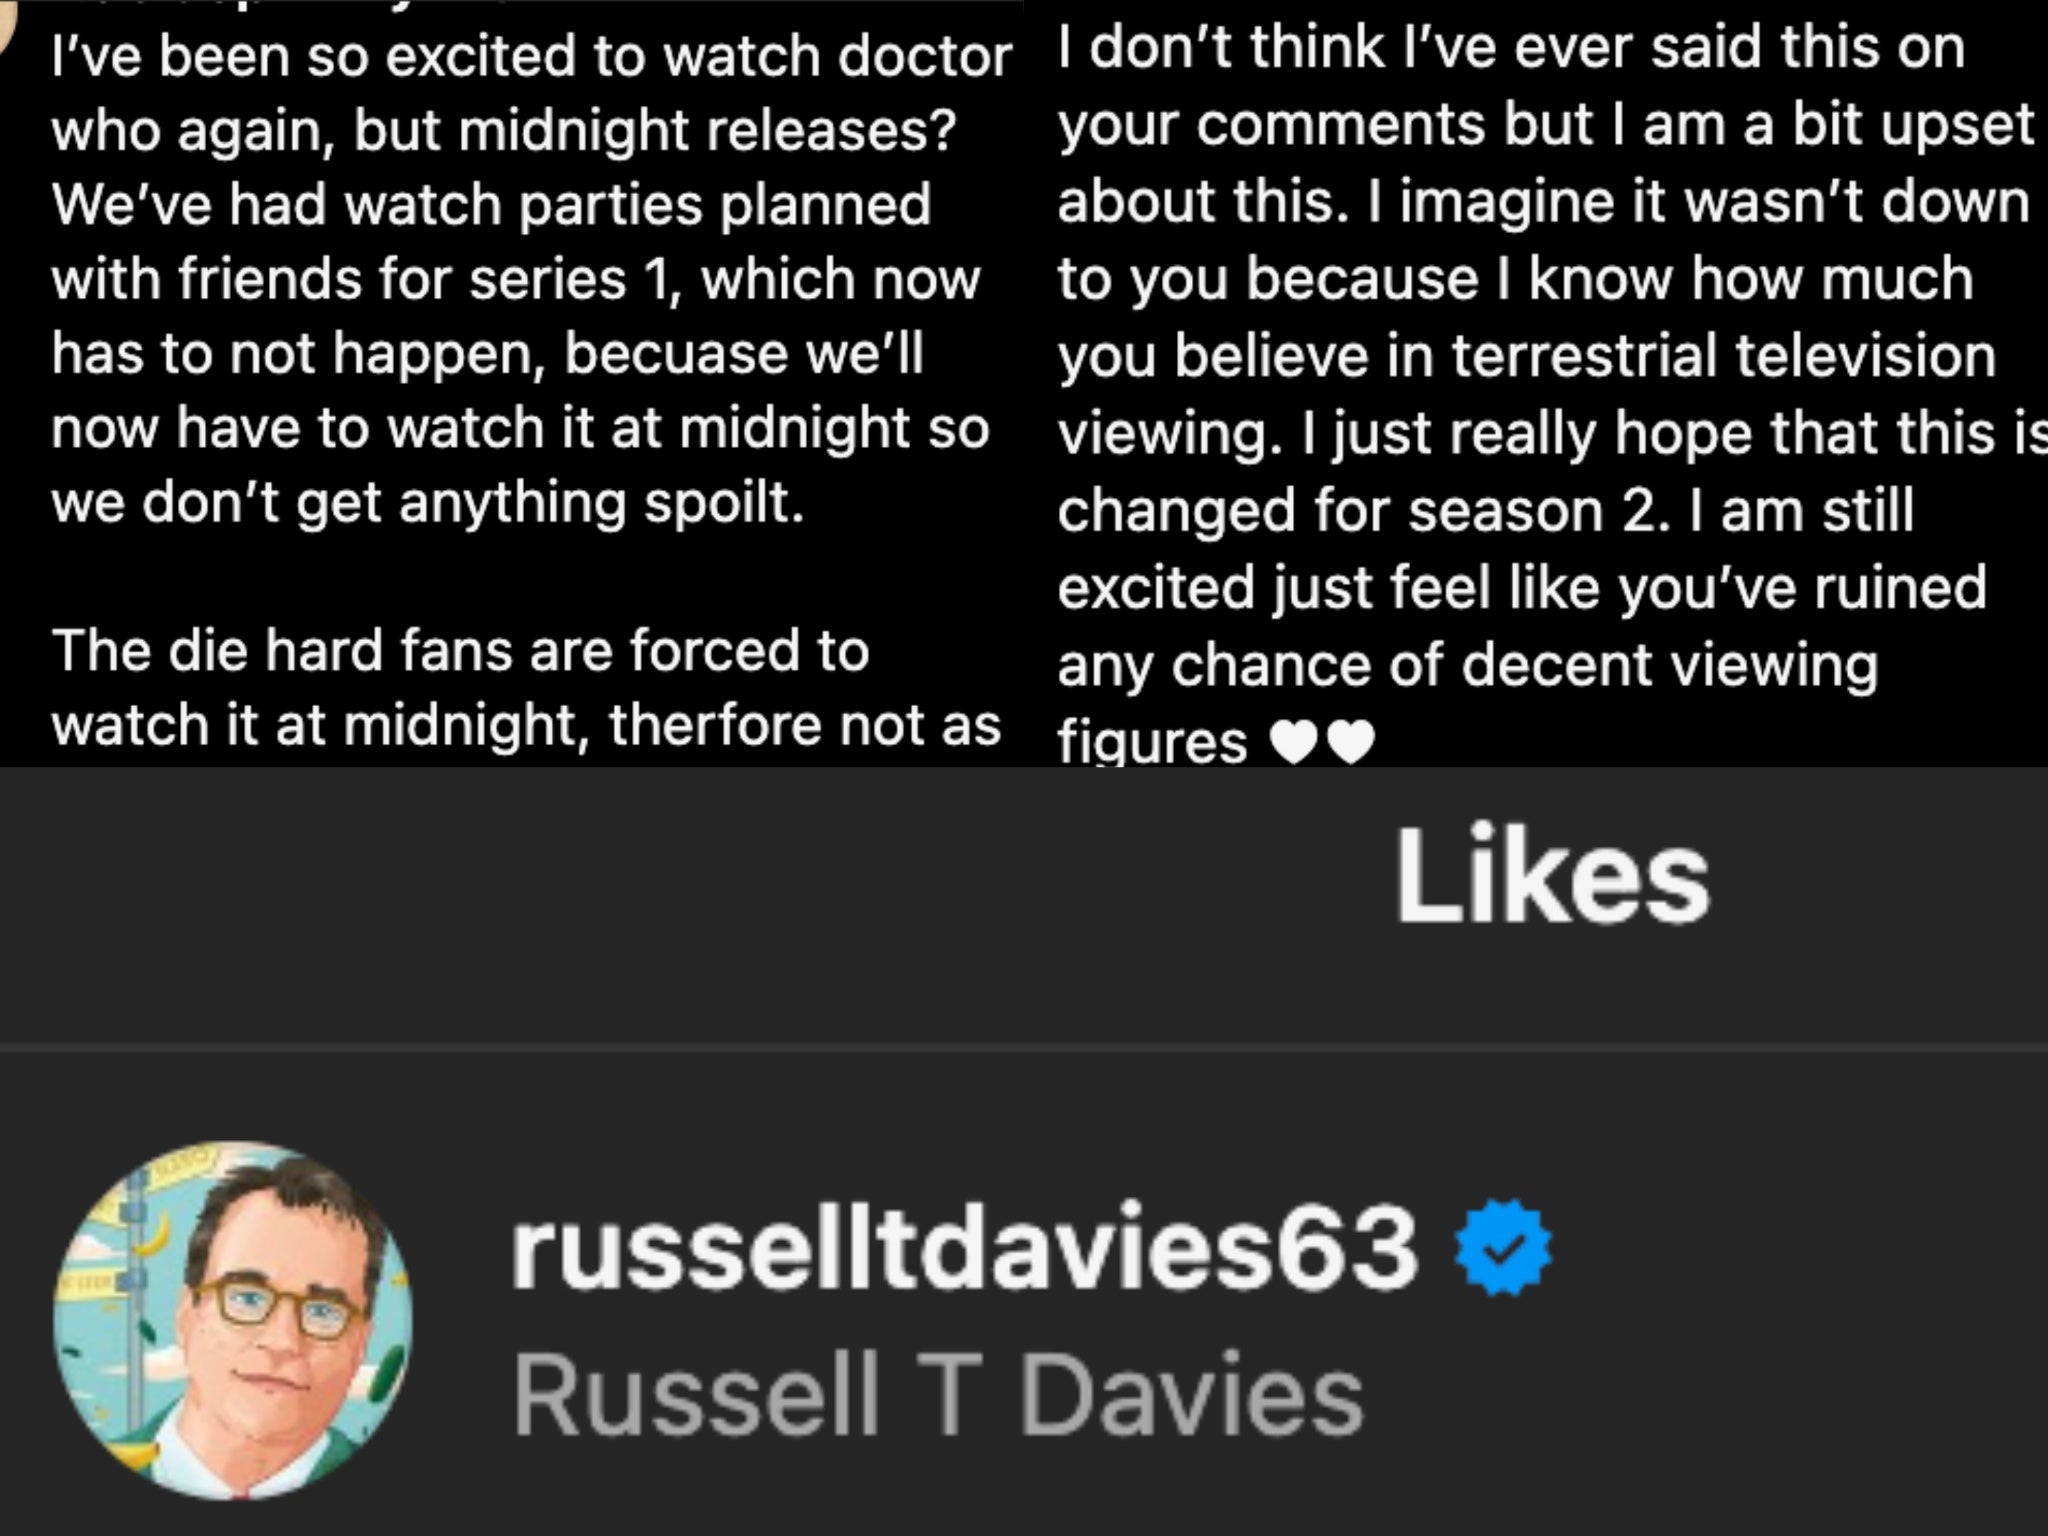 Russell T Davies likes posts criticising ‘Doctor Who’ episode rollout